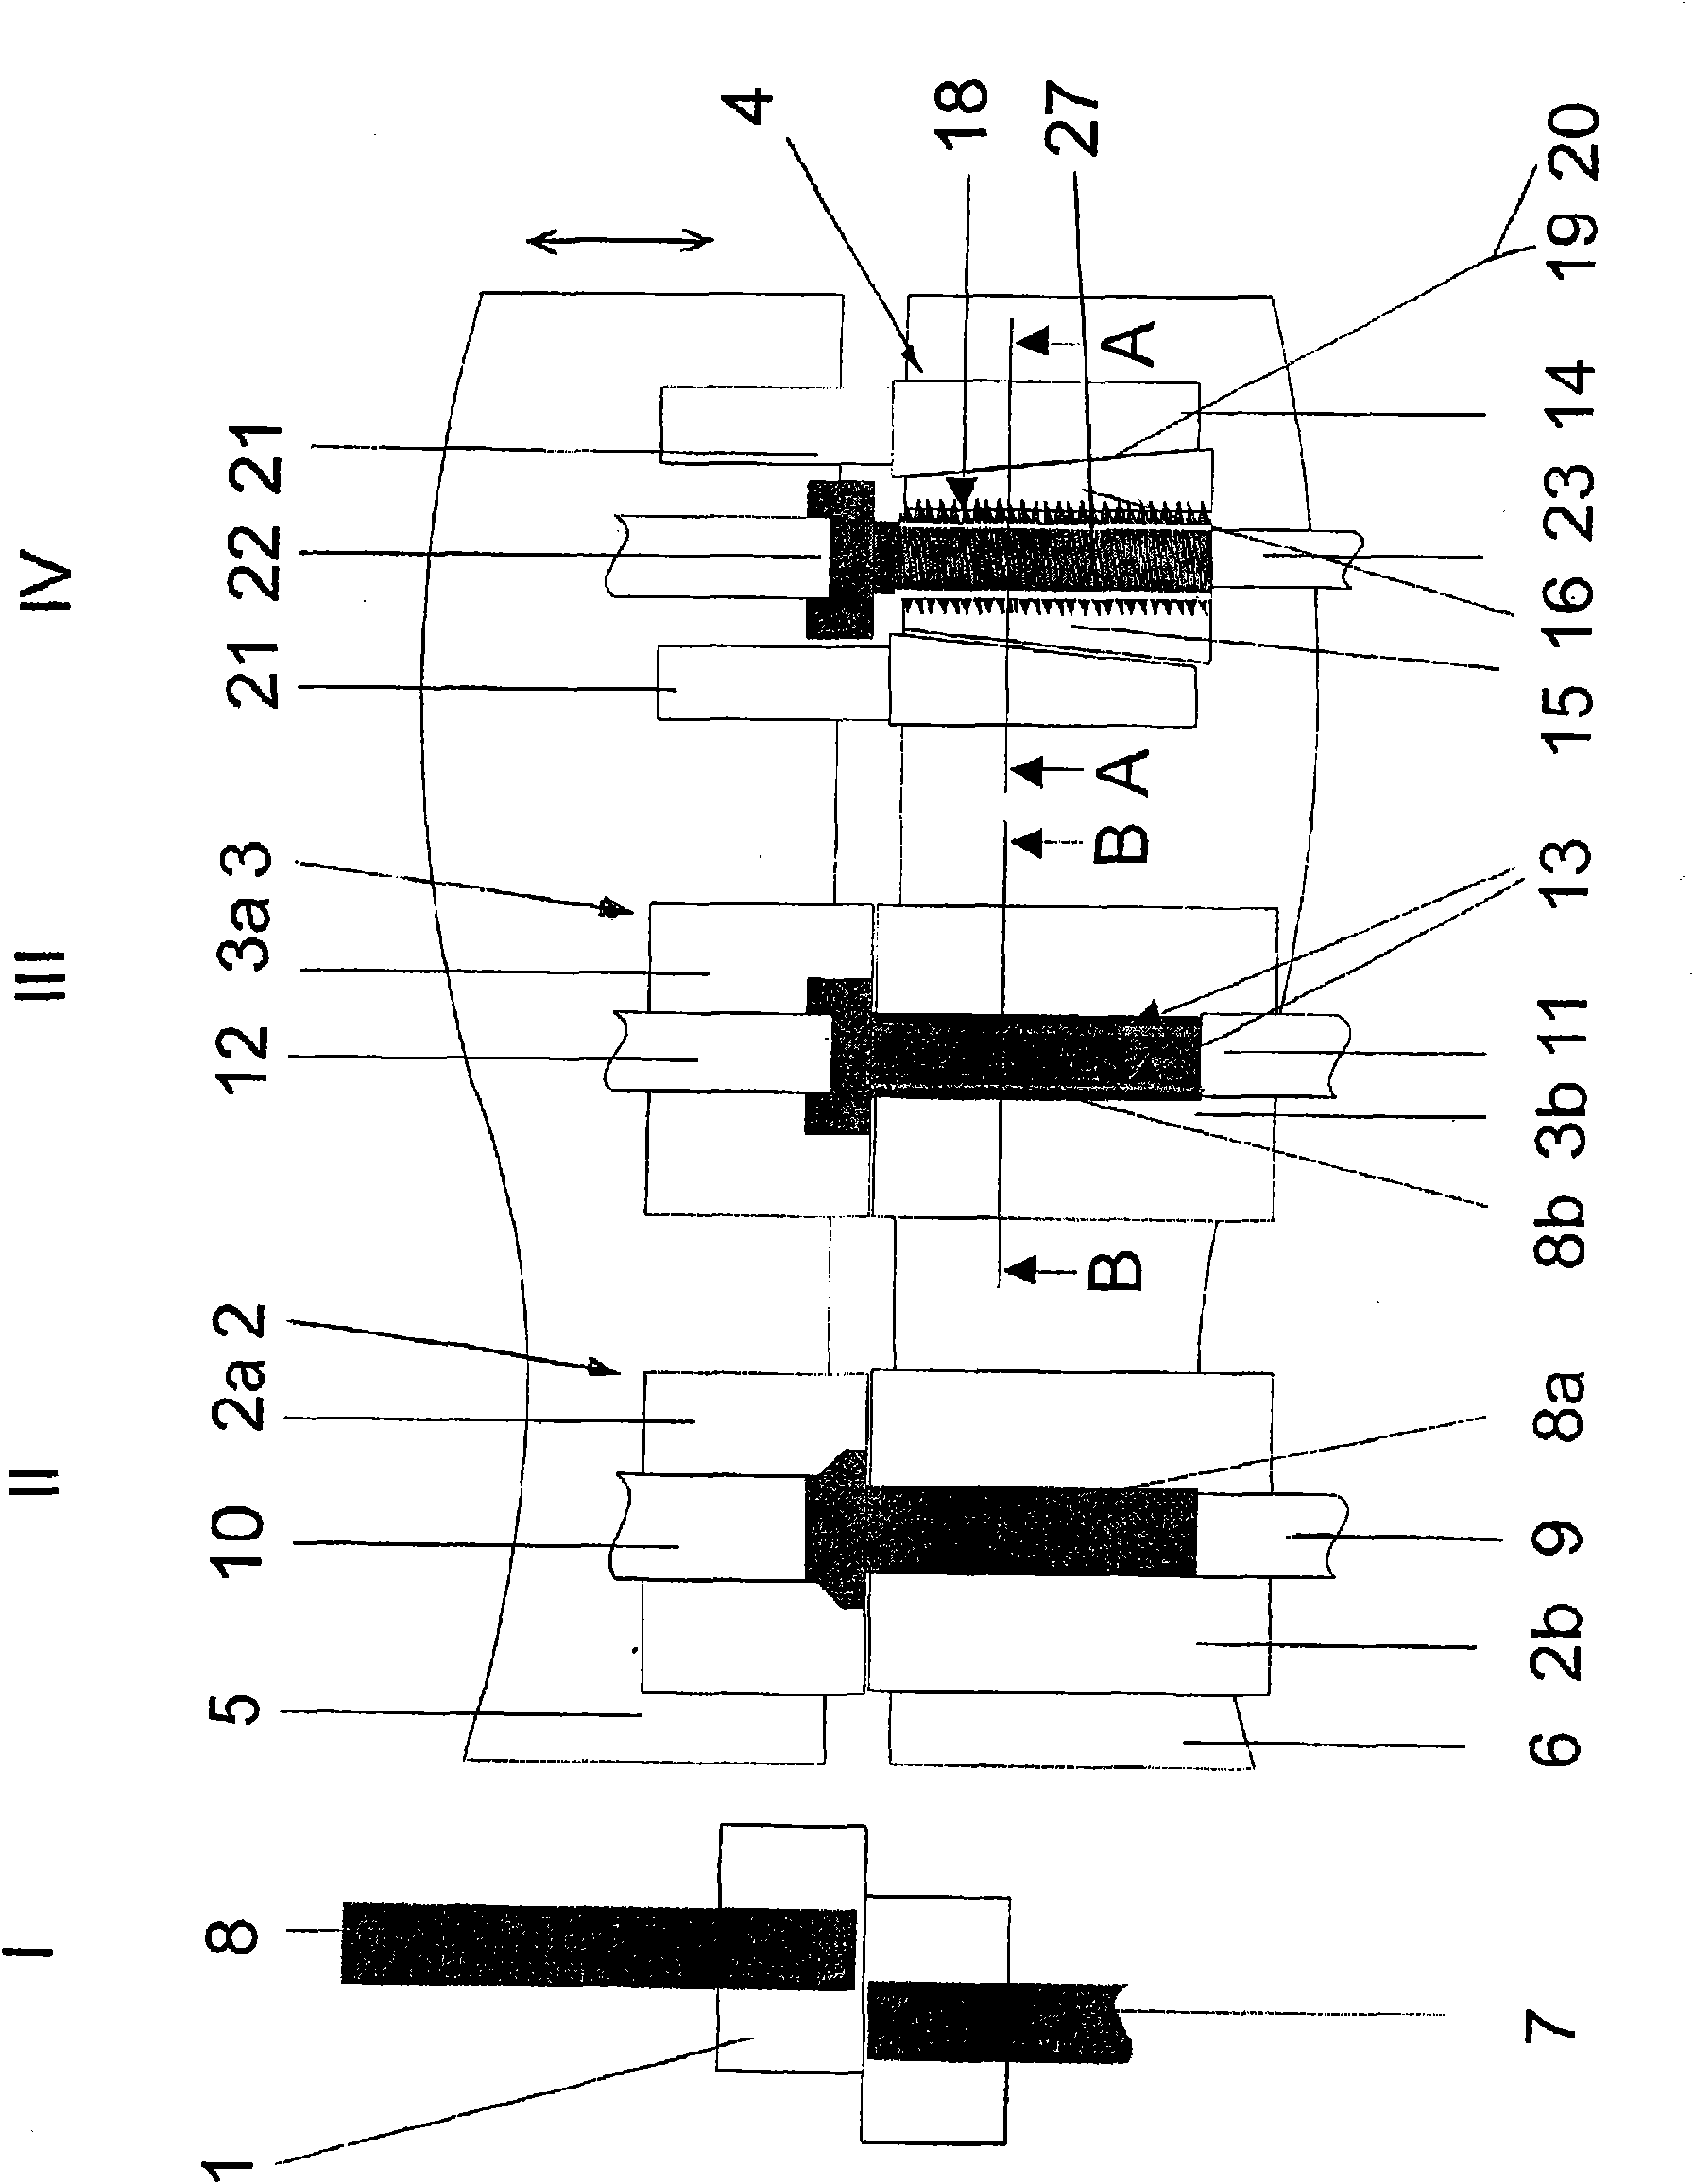 Method and device for producing fixing or connection components with radial outer contours, in particular screws or threaded bolts